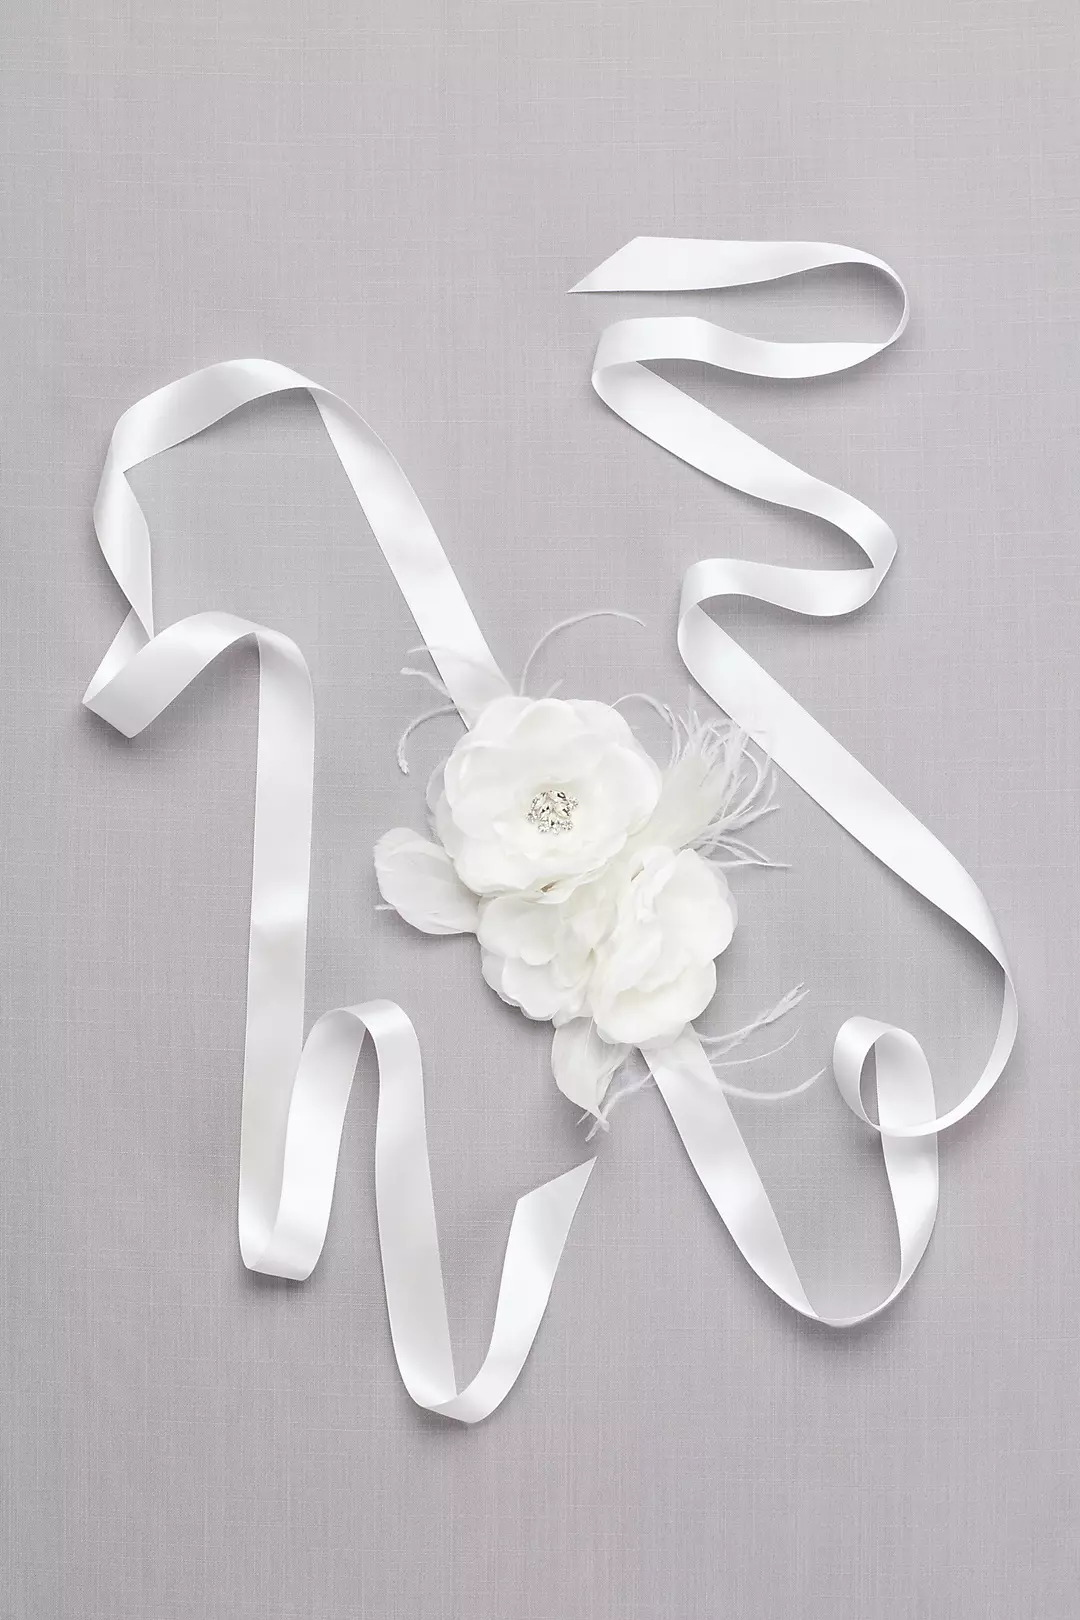 Flower Sash with Crystals and Feathers Image